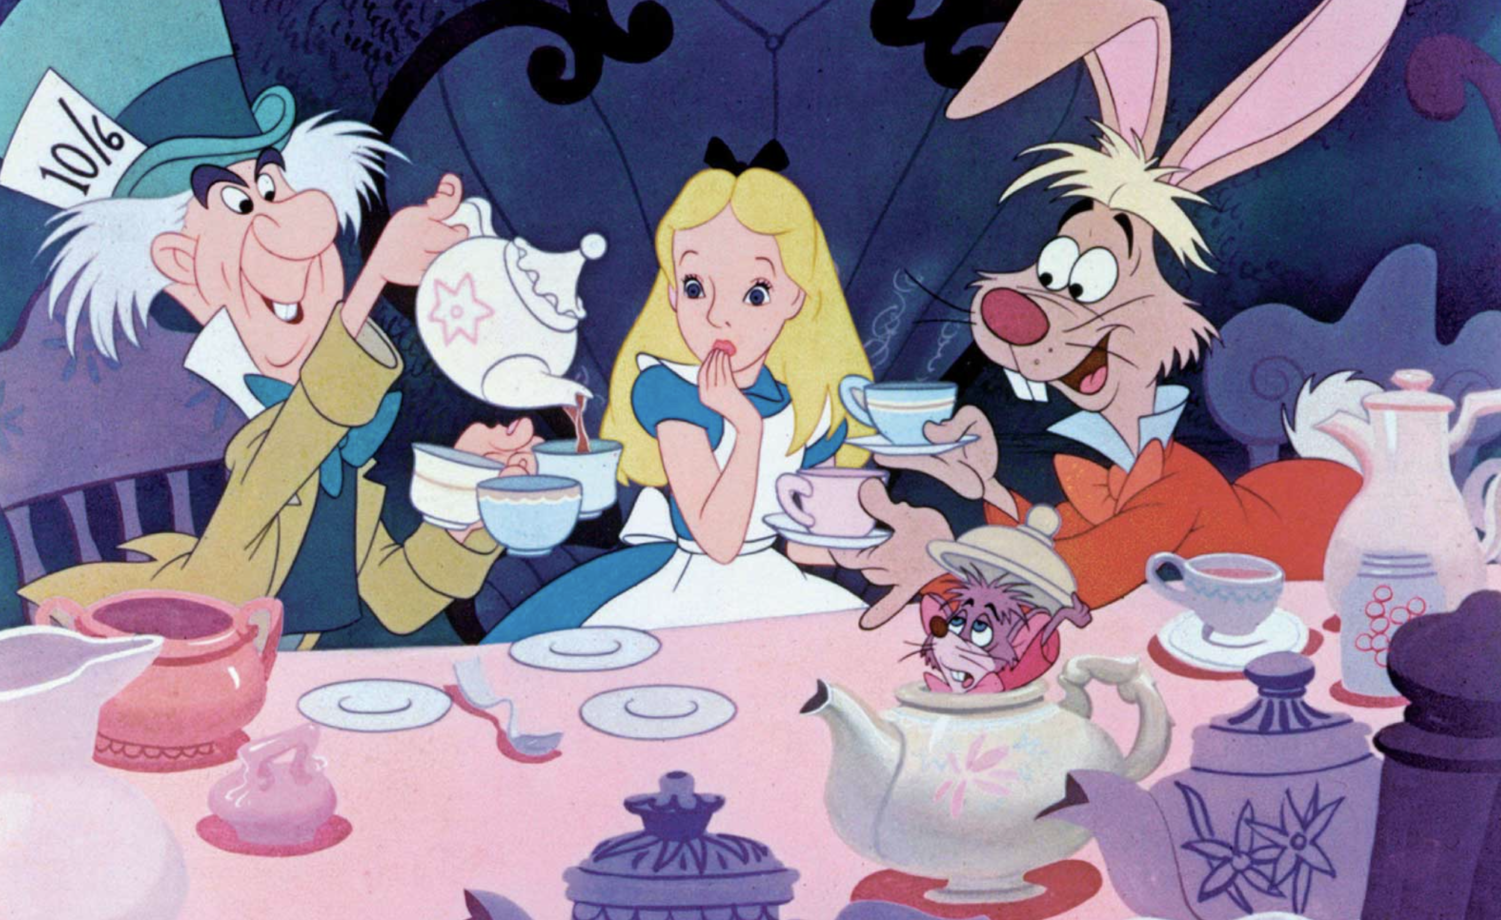 Real Party: Mad Hatter's Tea